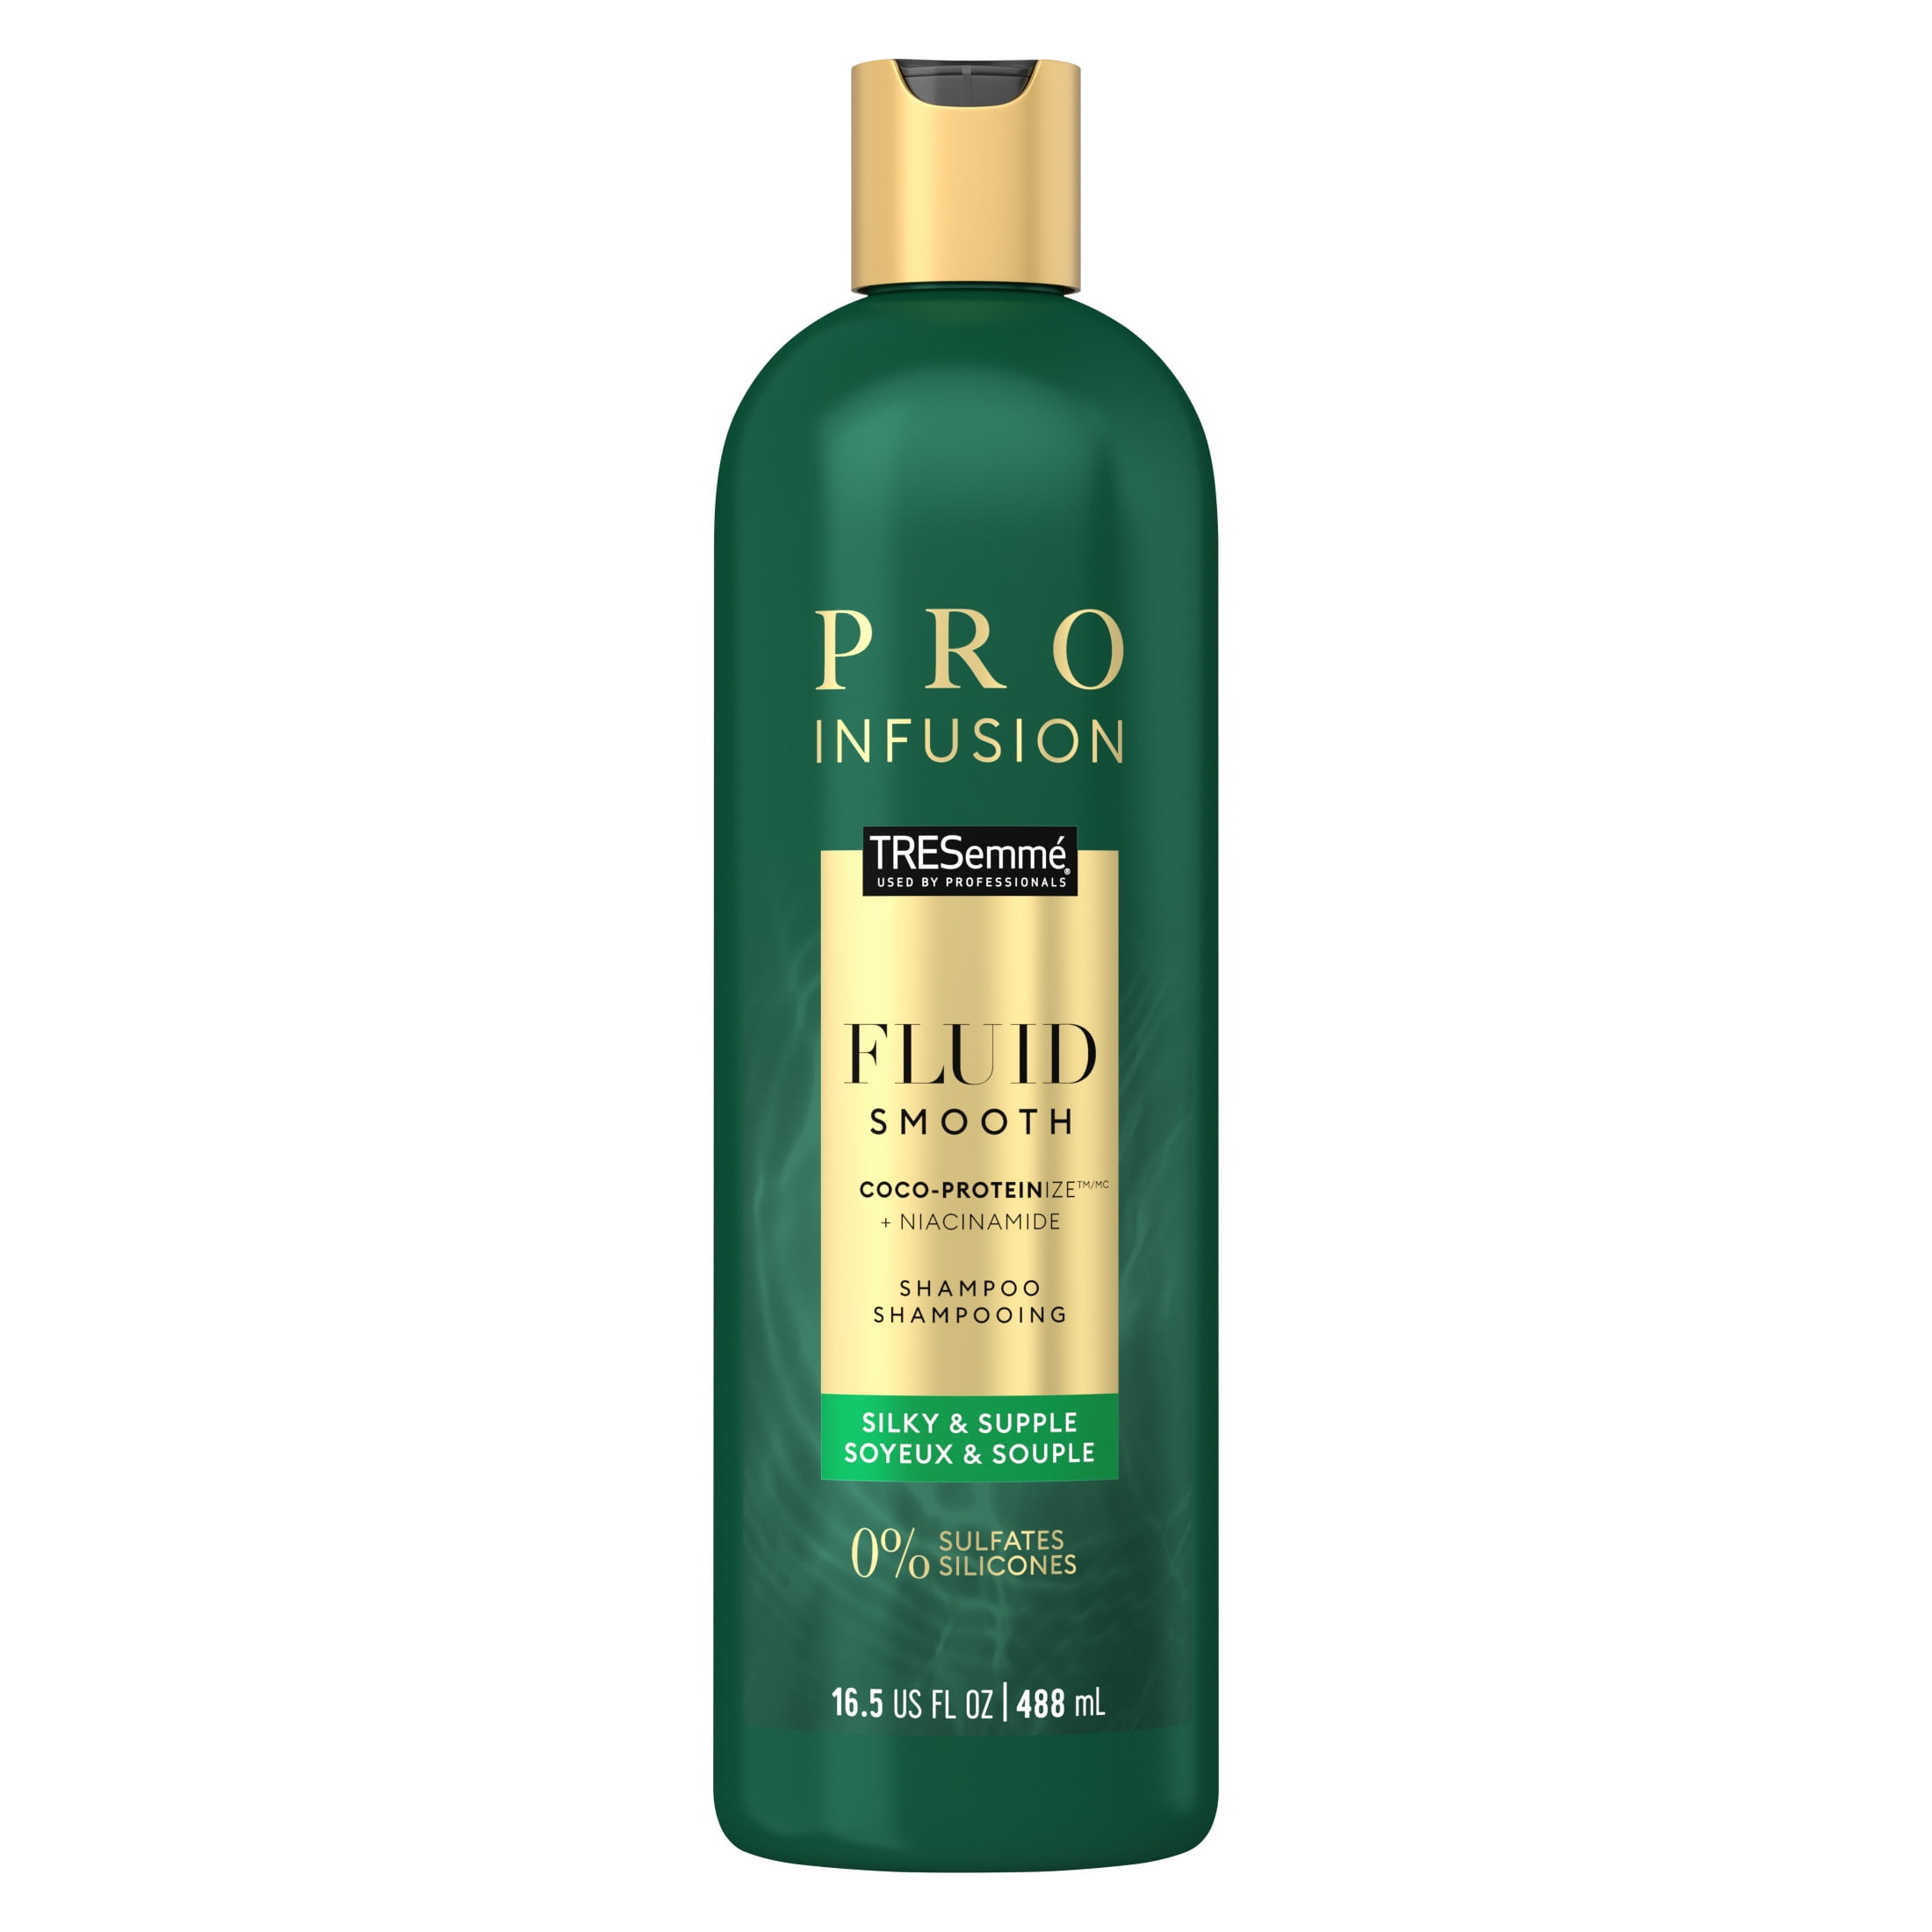 Tresemme Cruelty-Free Pro Infusion Fluid Smooth Sulfate-Free Shampoo, 16.5 oz